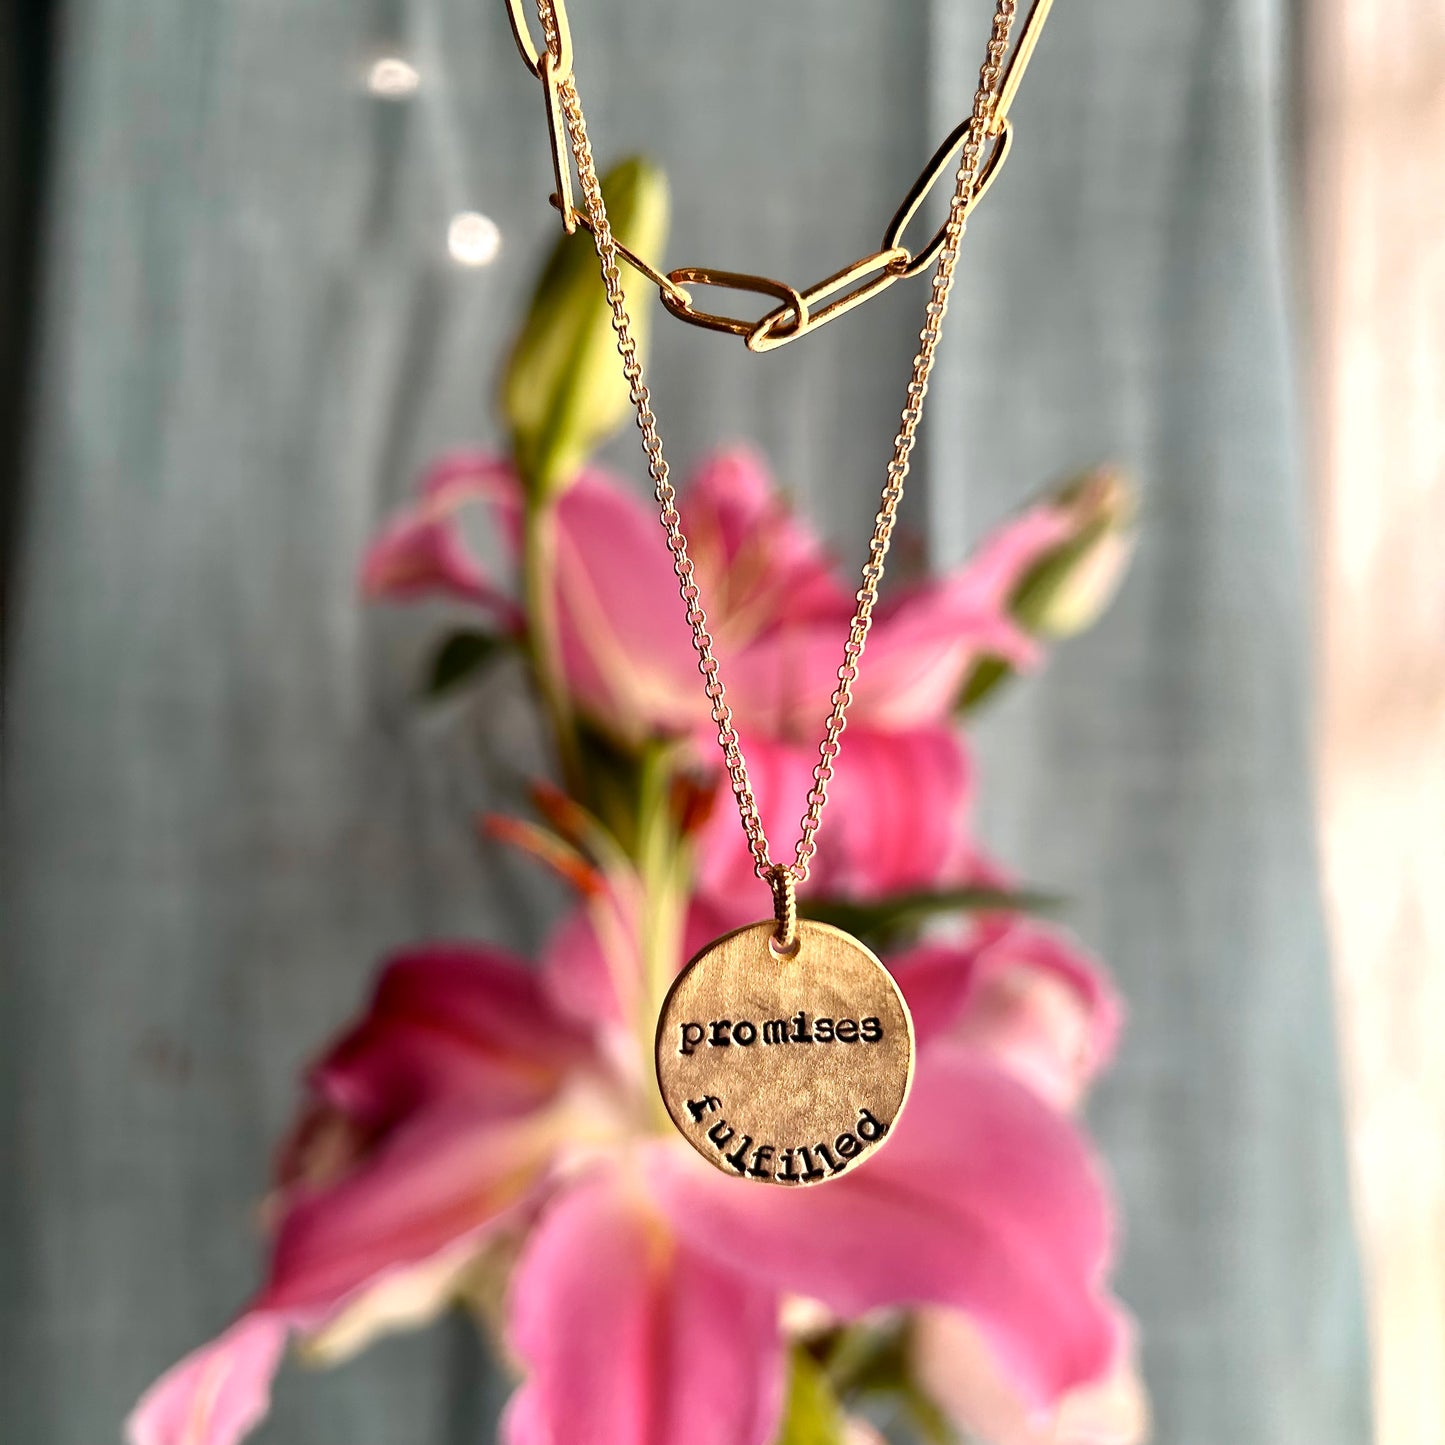 Promises Fulfilled Layered Necklace